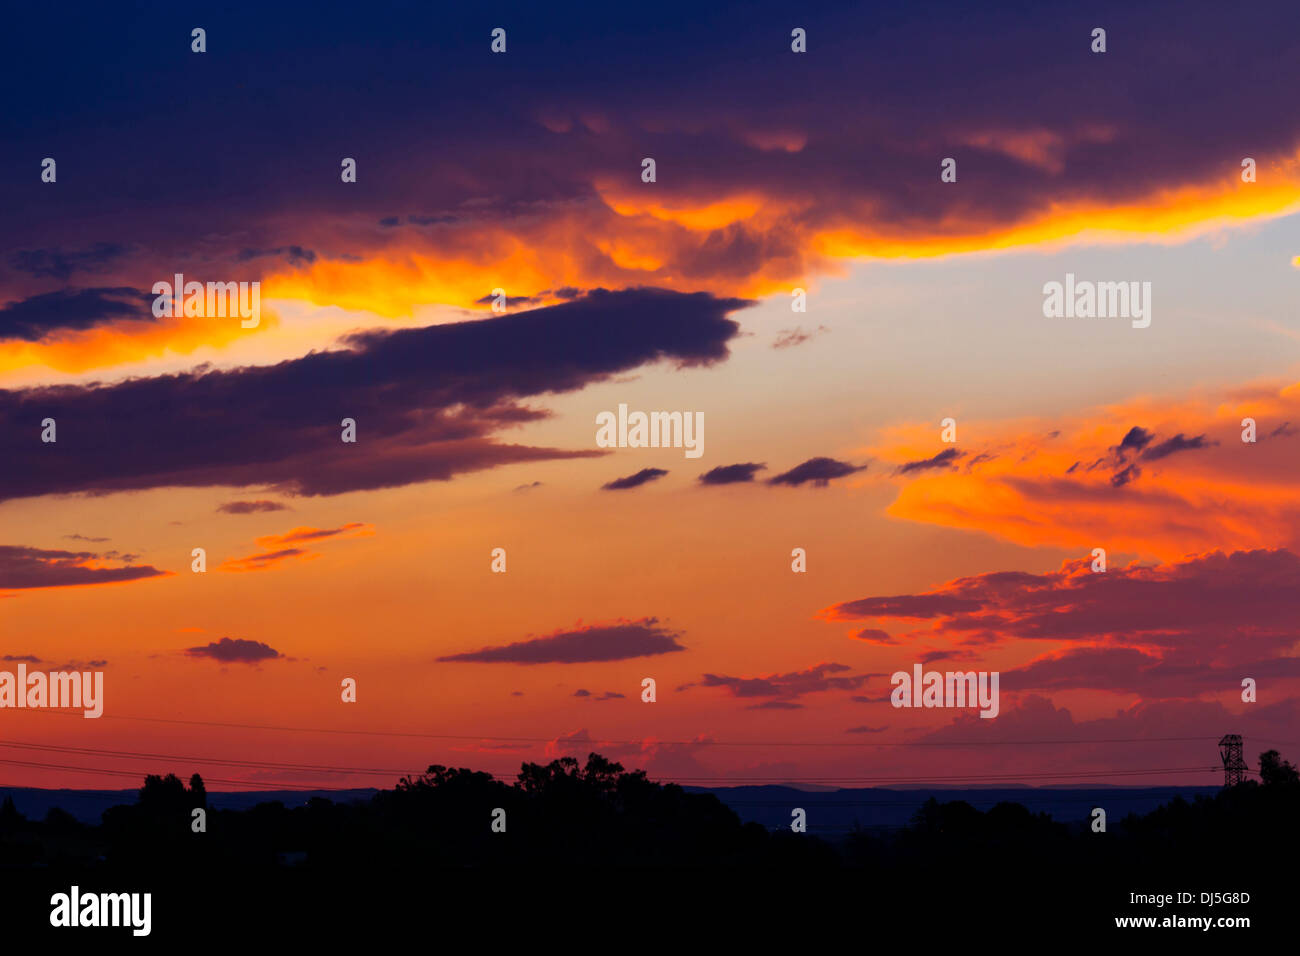 Beautiful Sunset With Colorful Orange, Yellow and Purple Clouds Stock Photo